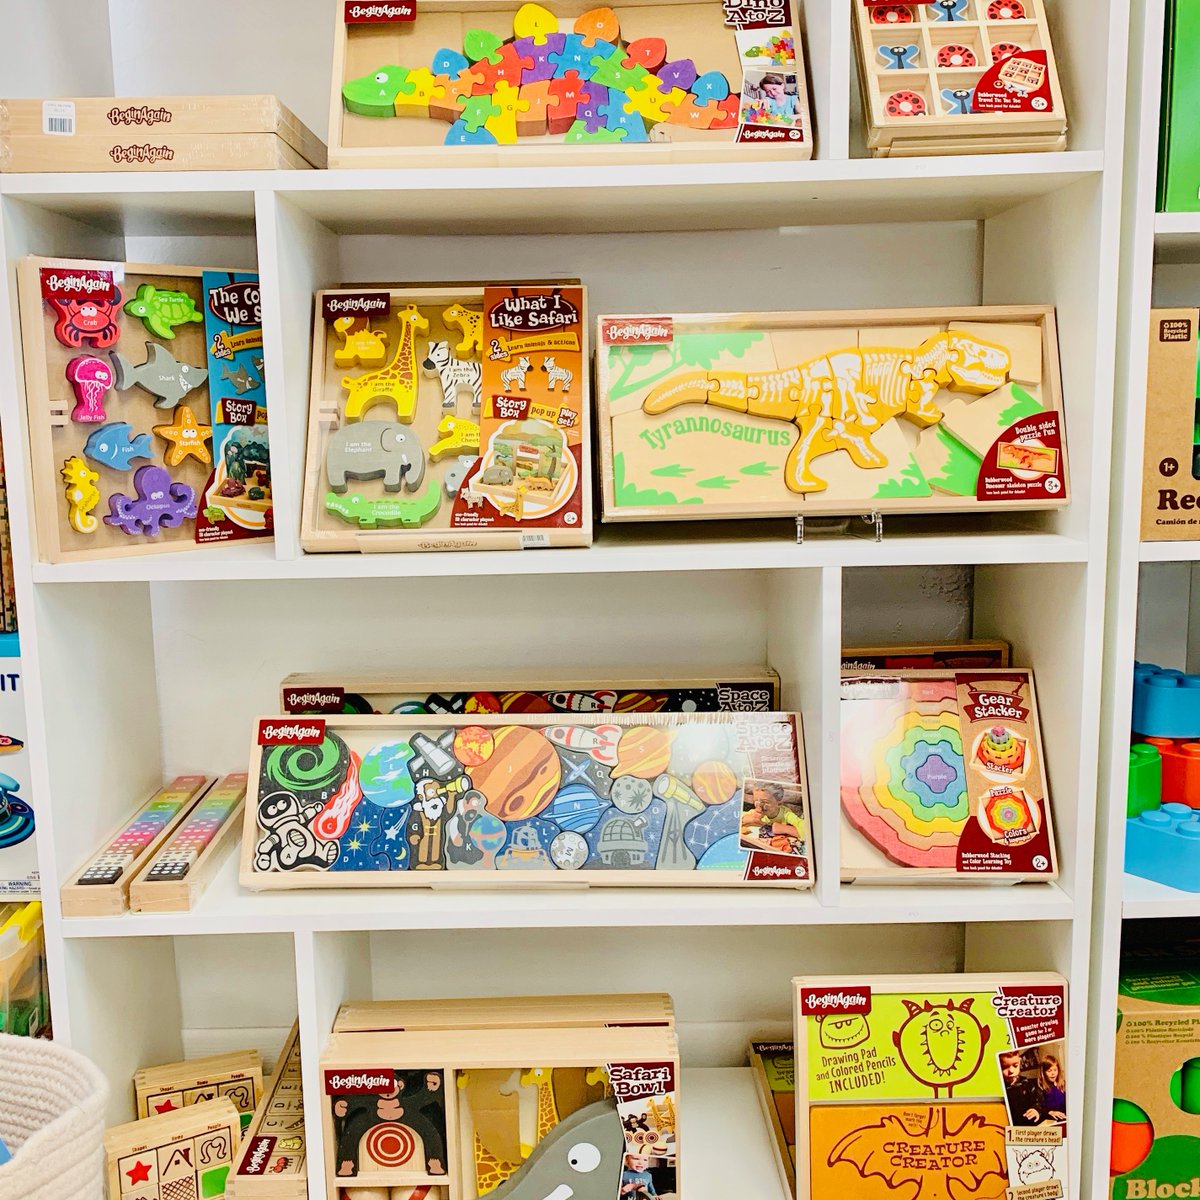 Wooden puzzles are a wonderful #plasticfree gift to consider this holiday season. These colorful ones from @BeginAgainToys will dazzle your little ones with endless hours of entertainment. #Ecotoys